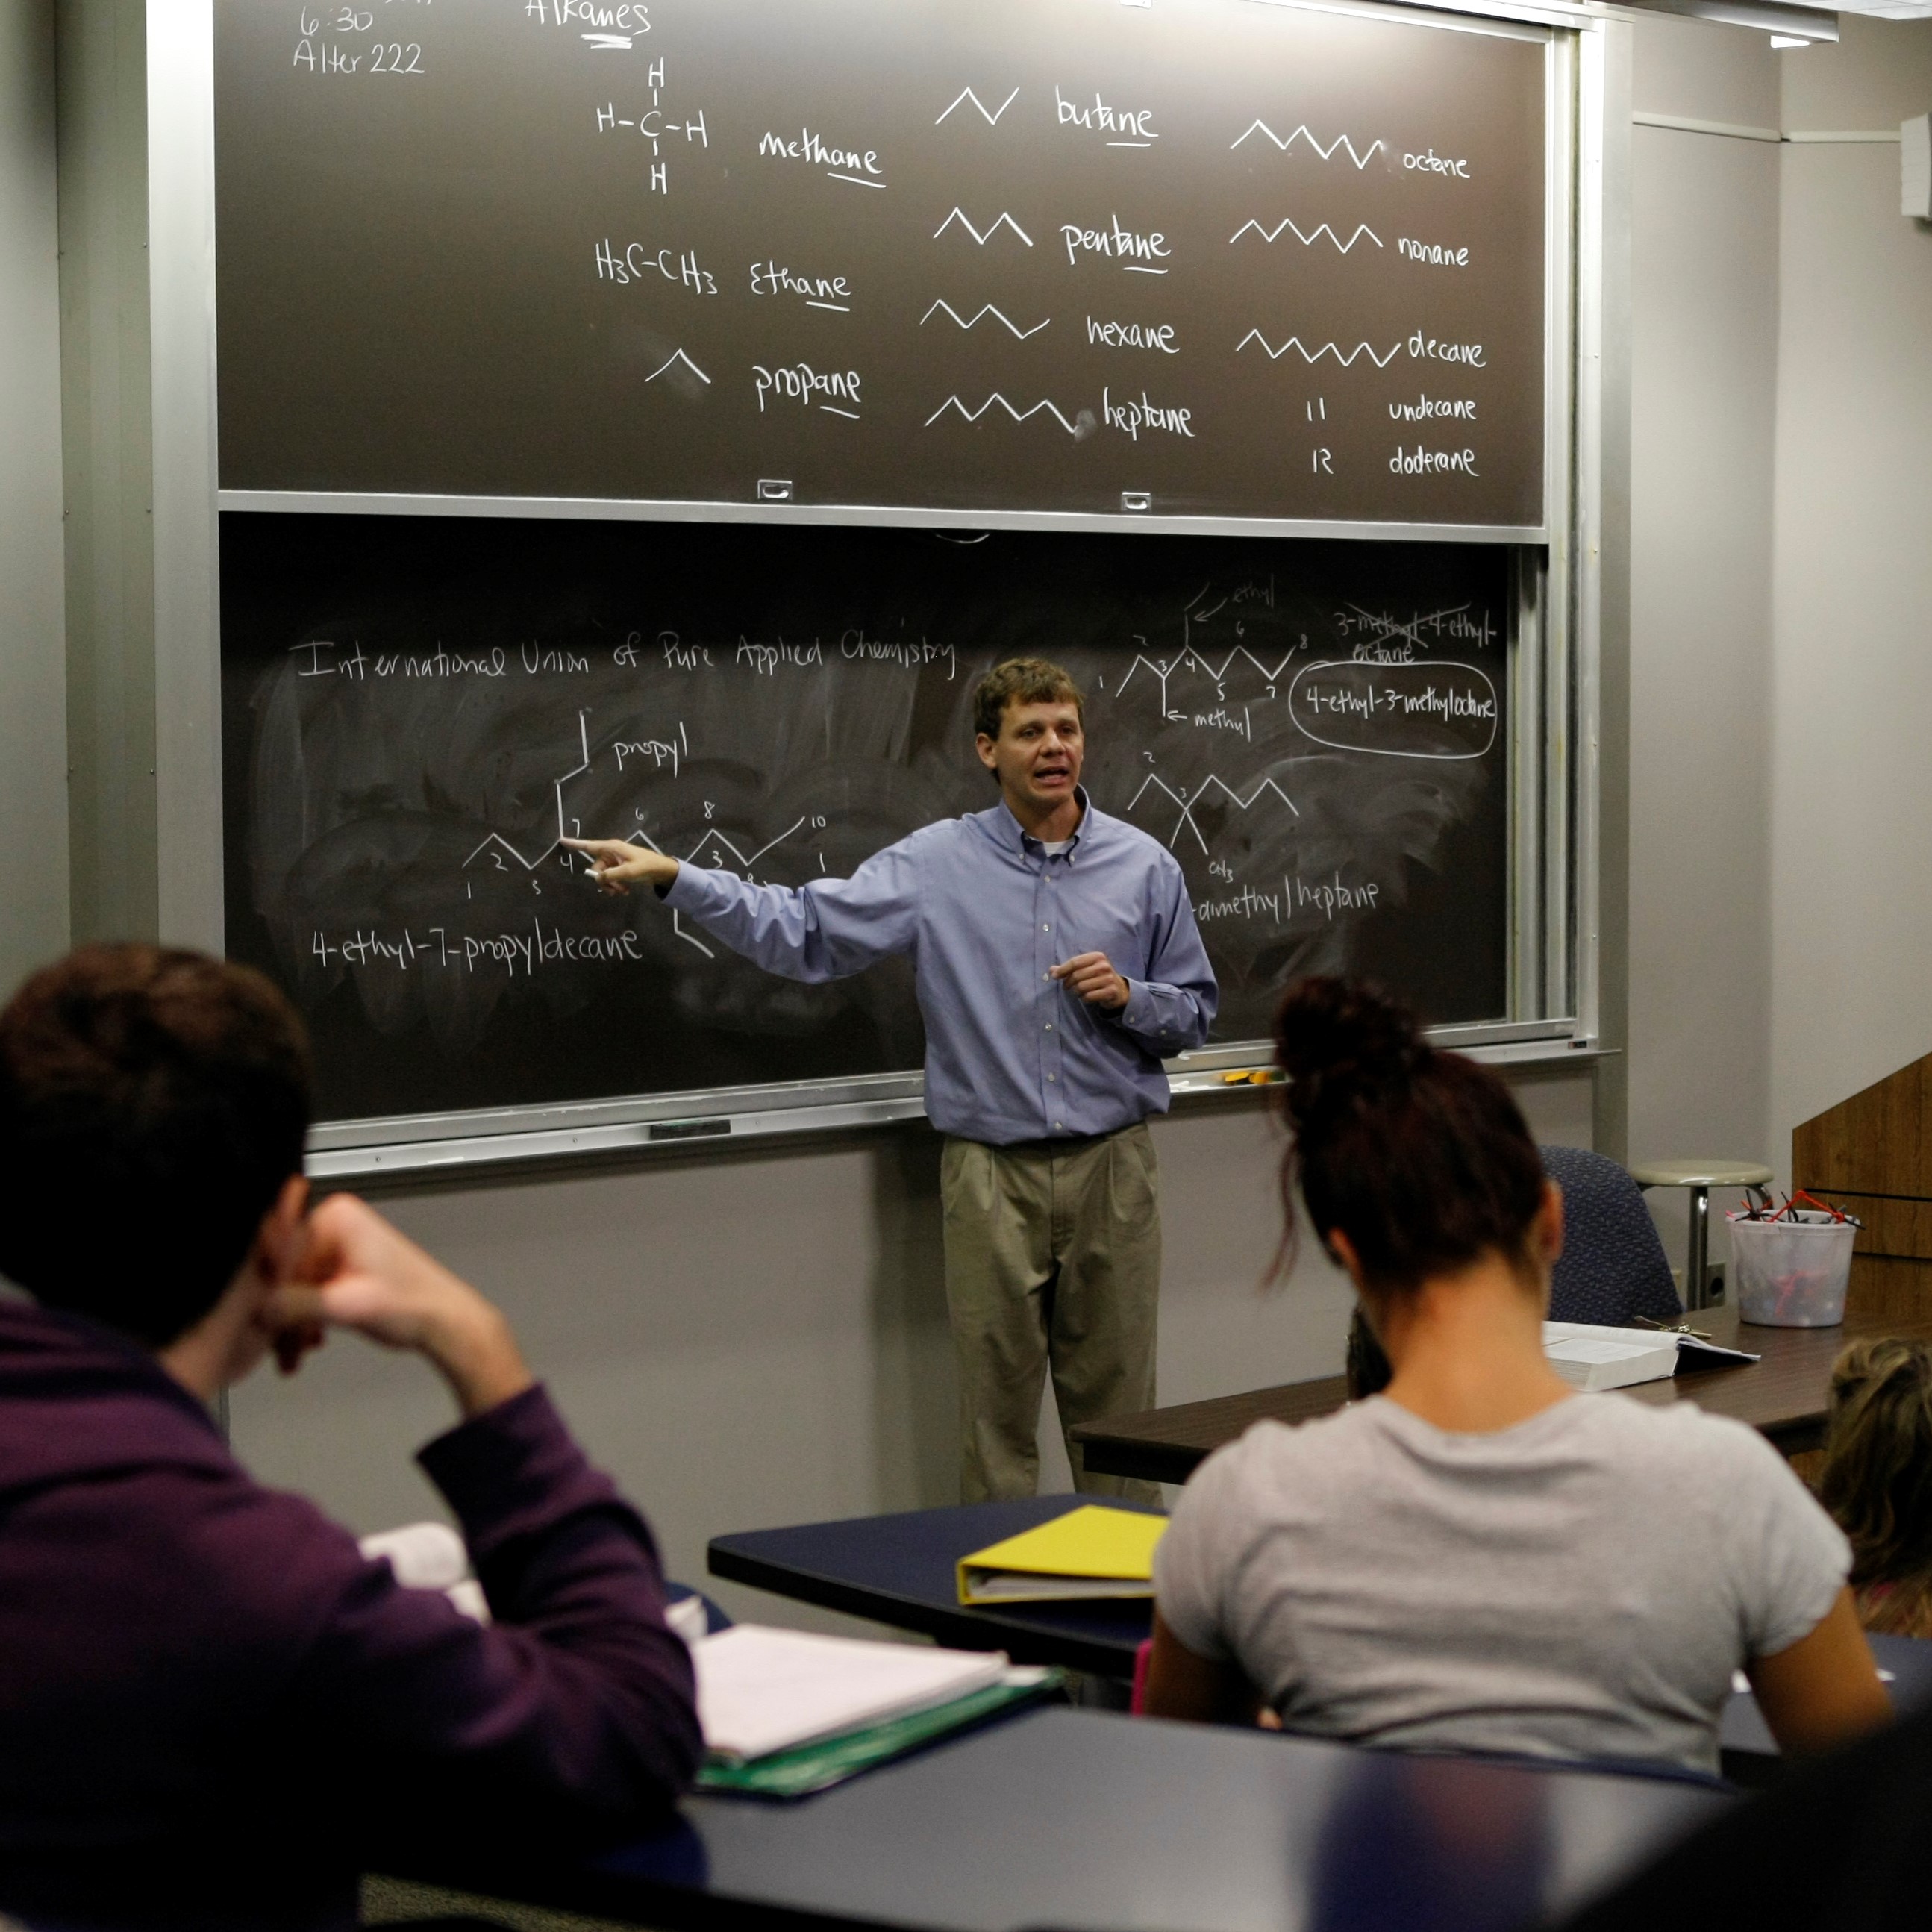 Professor pointing at chalkboard during class